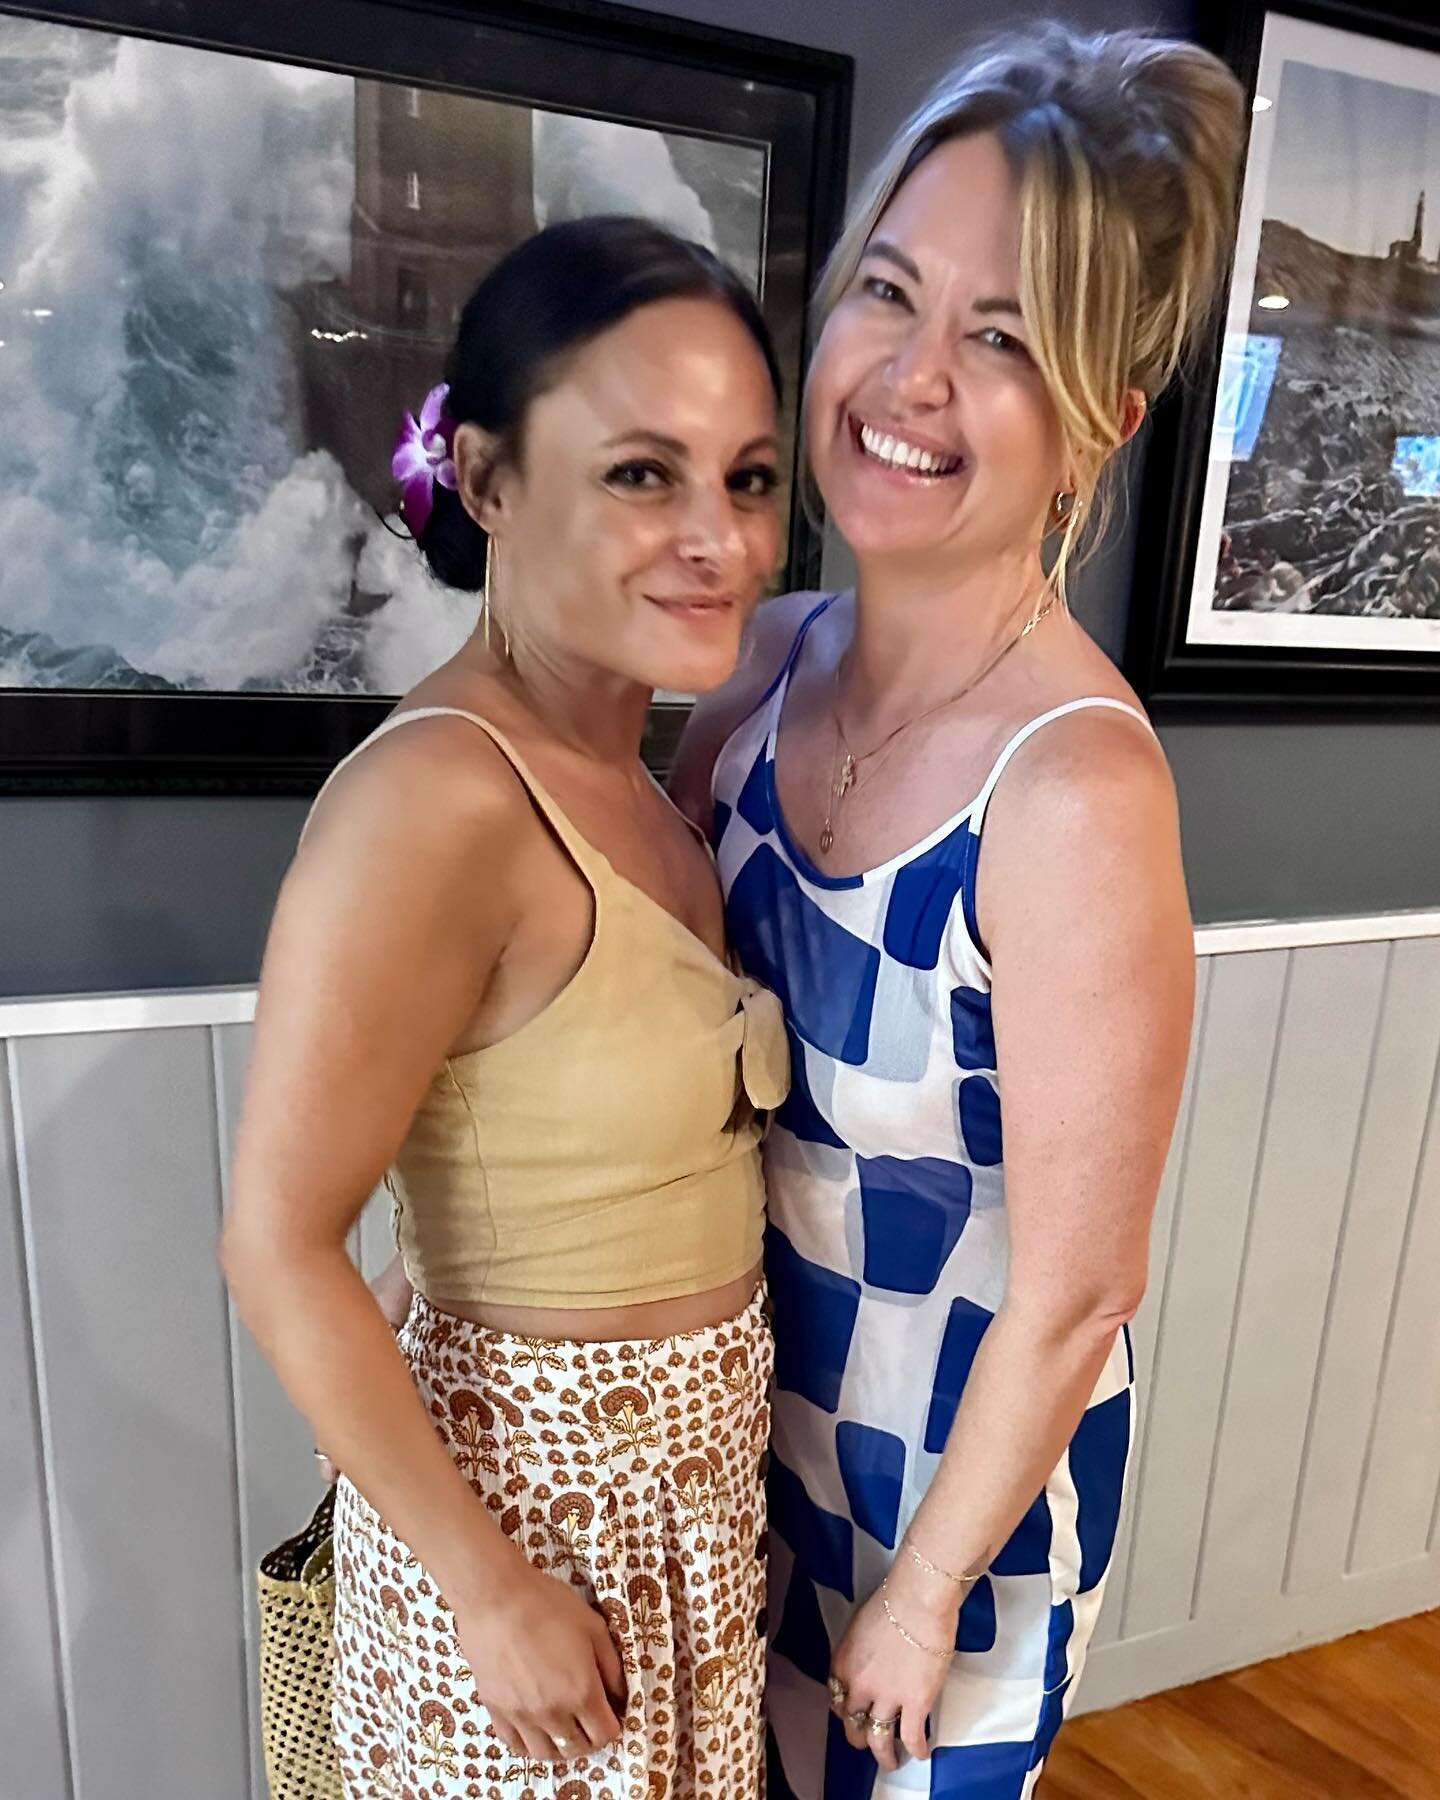 Sabrina &amp; Nicki &mdash; I&rsquo;m so glad you had such a great time this evening. It was a pleasure meeting you all! 🌸 

#hamptonbays #eastend #hamptonbaysdining